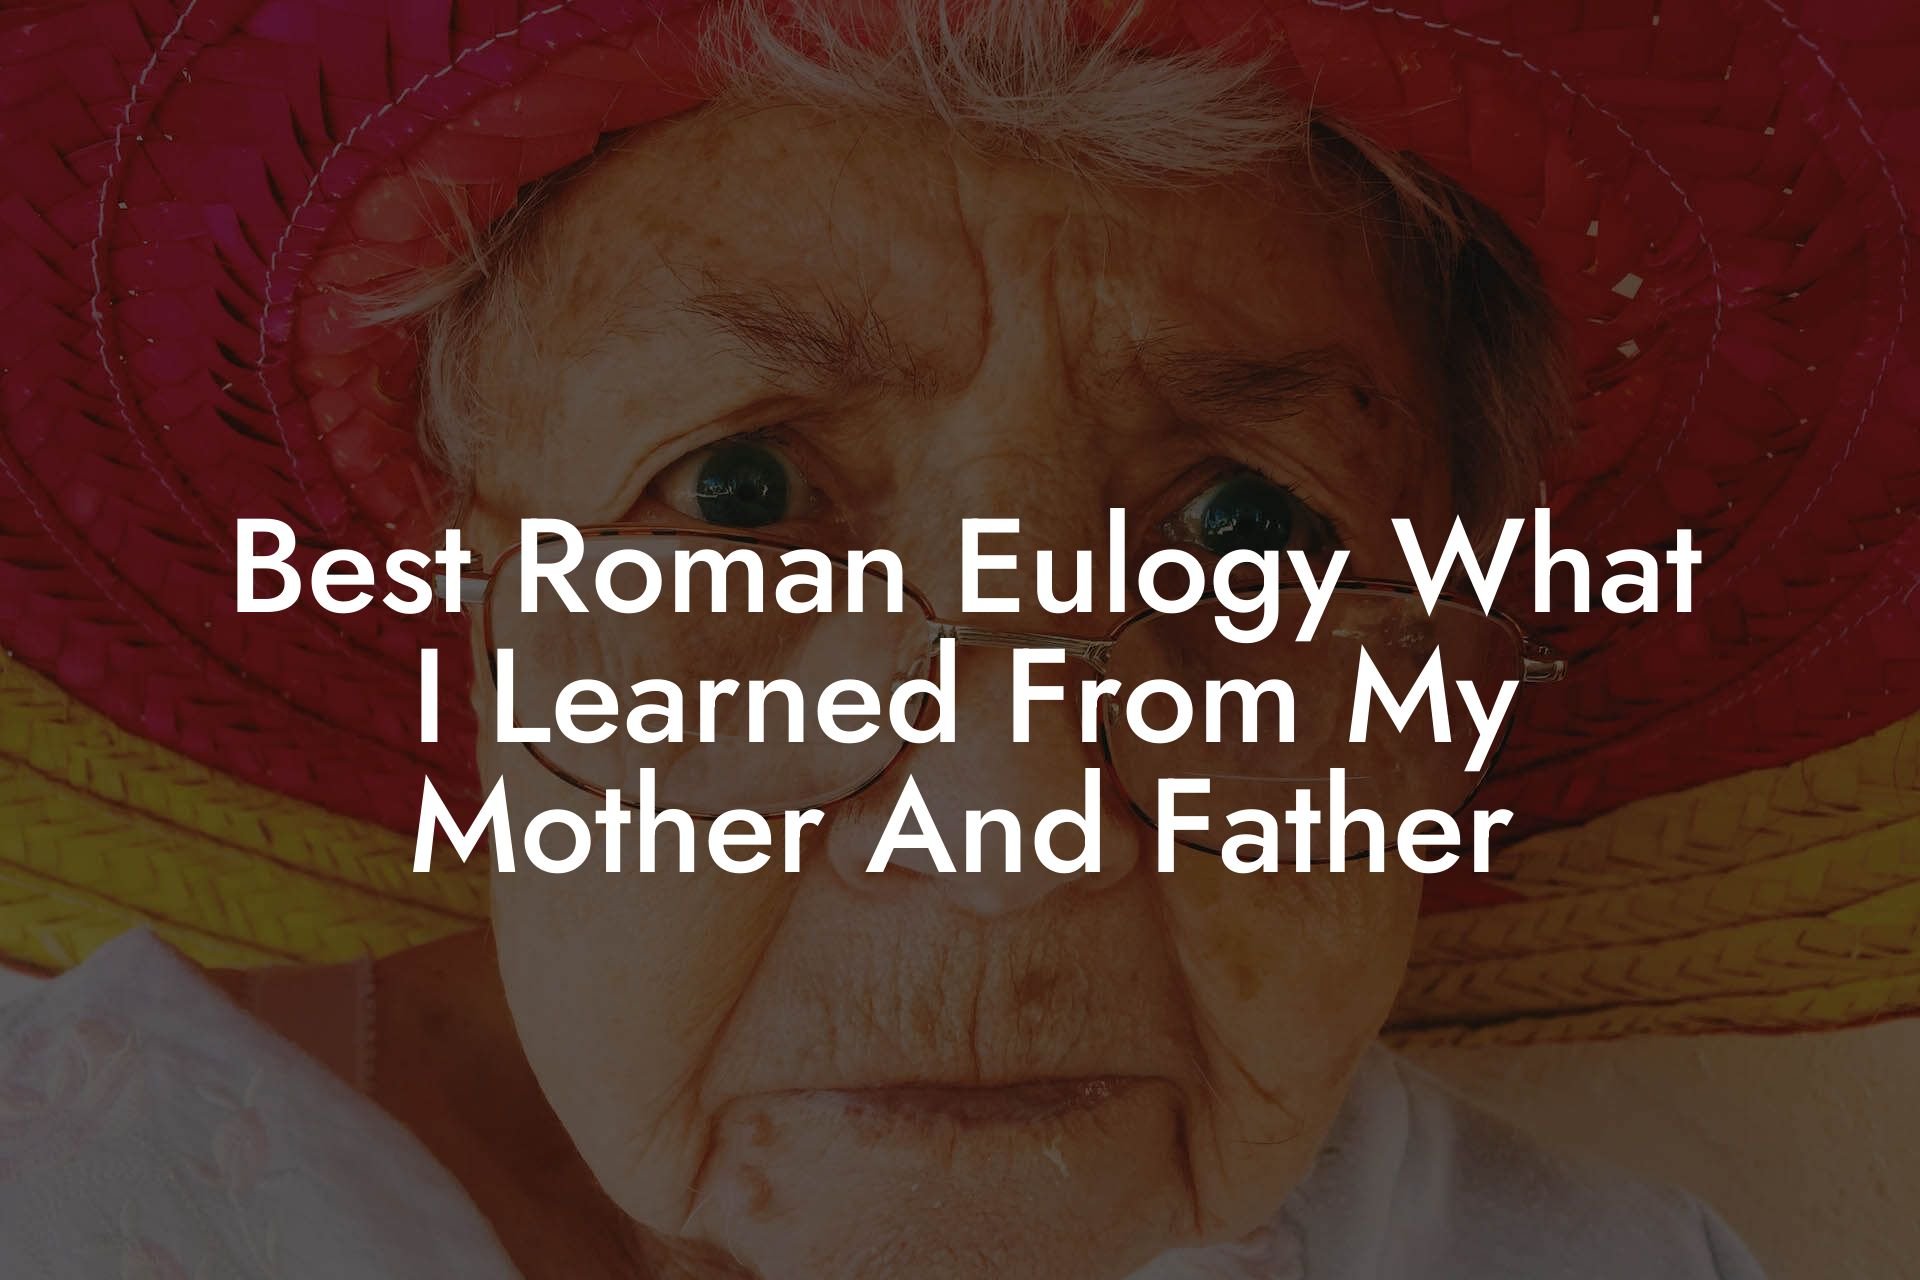 Best Roman Eulogy What I Learned From My Mother And Father